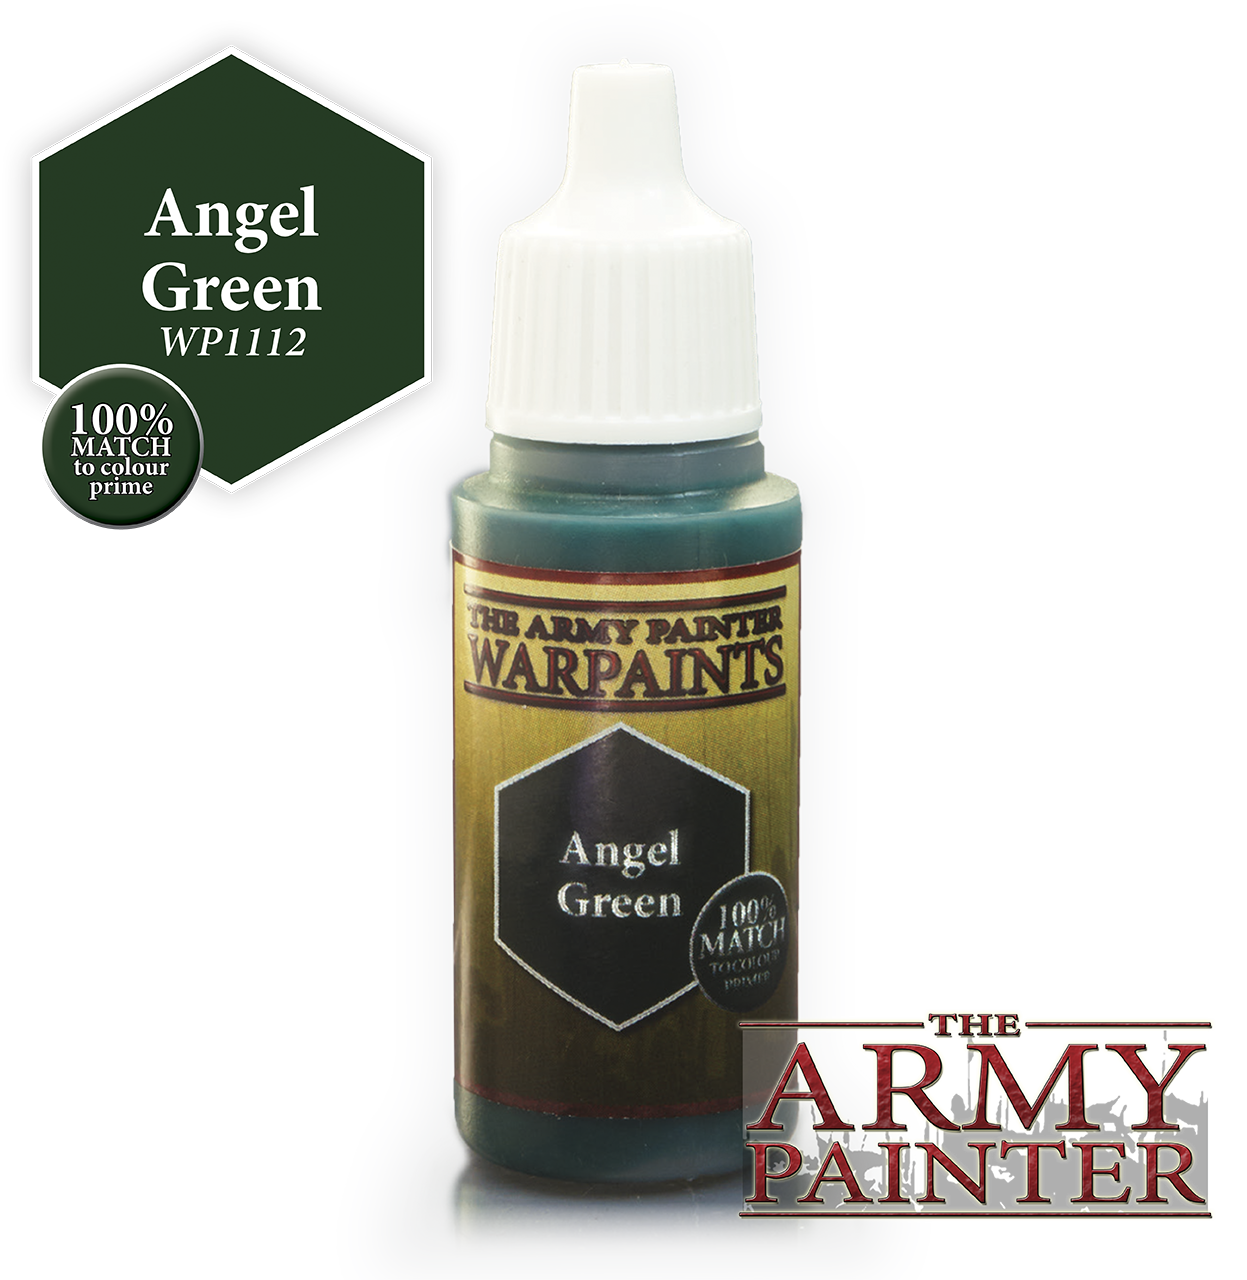 The ARMY PAINTER: Acrylics Warpaint - Angel Green | Tacoma Games